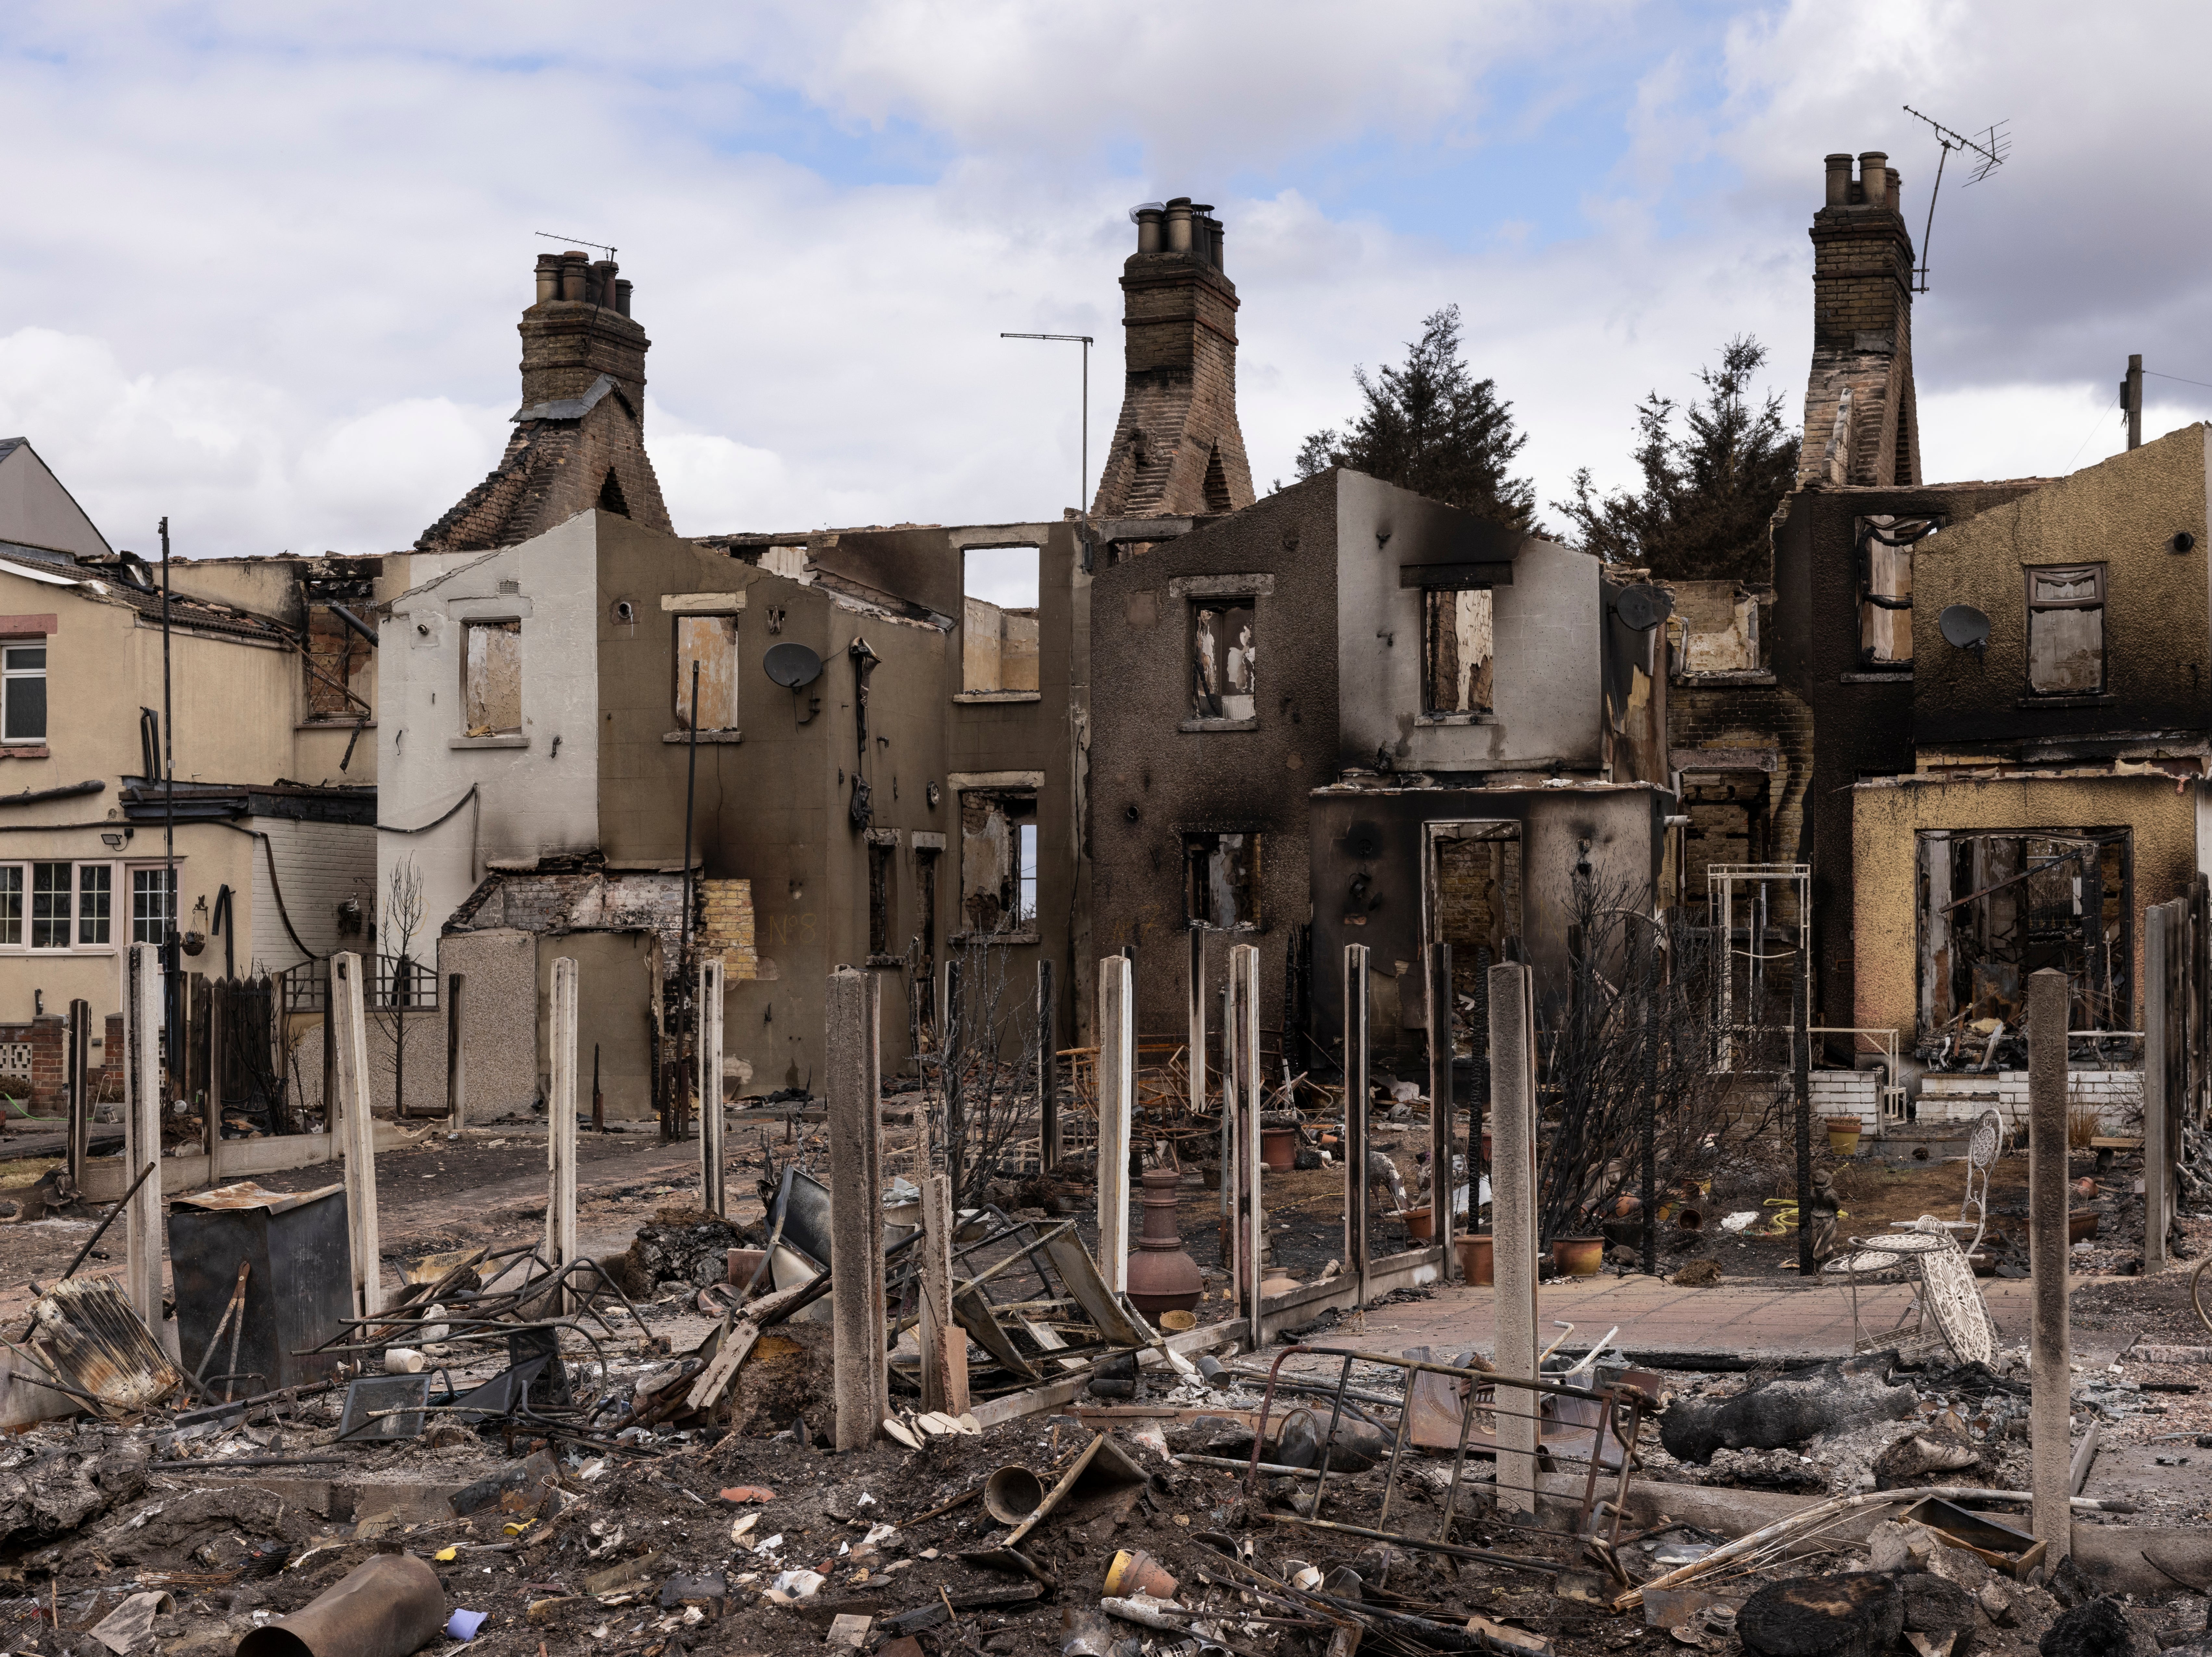 Forty properties were destroyed in Wennington, greater London, last month amid the highest UK temperatures on record